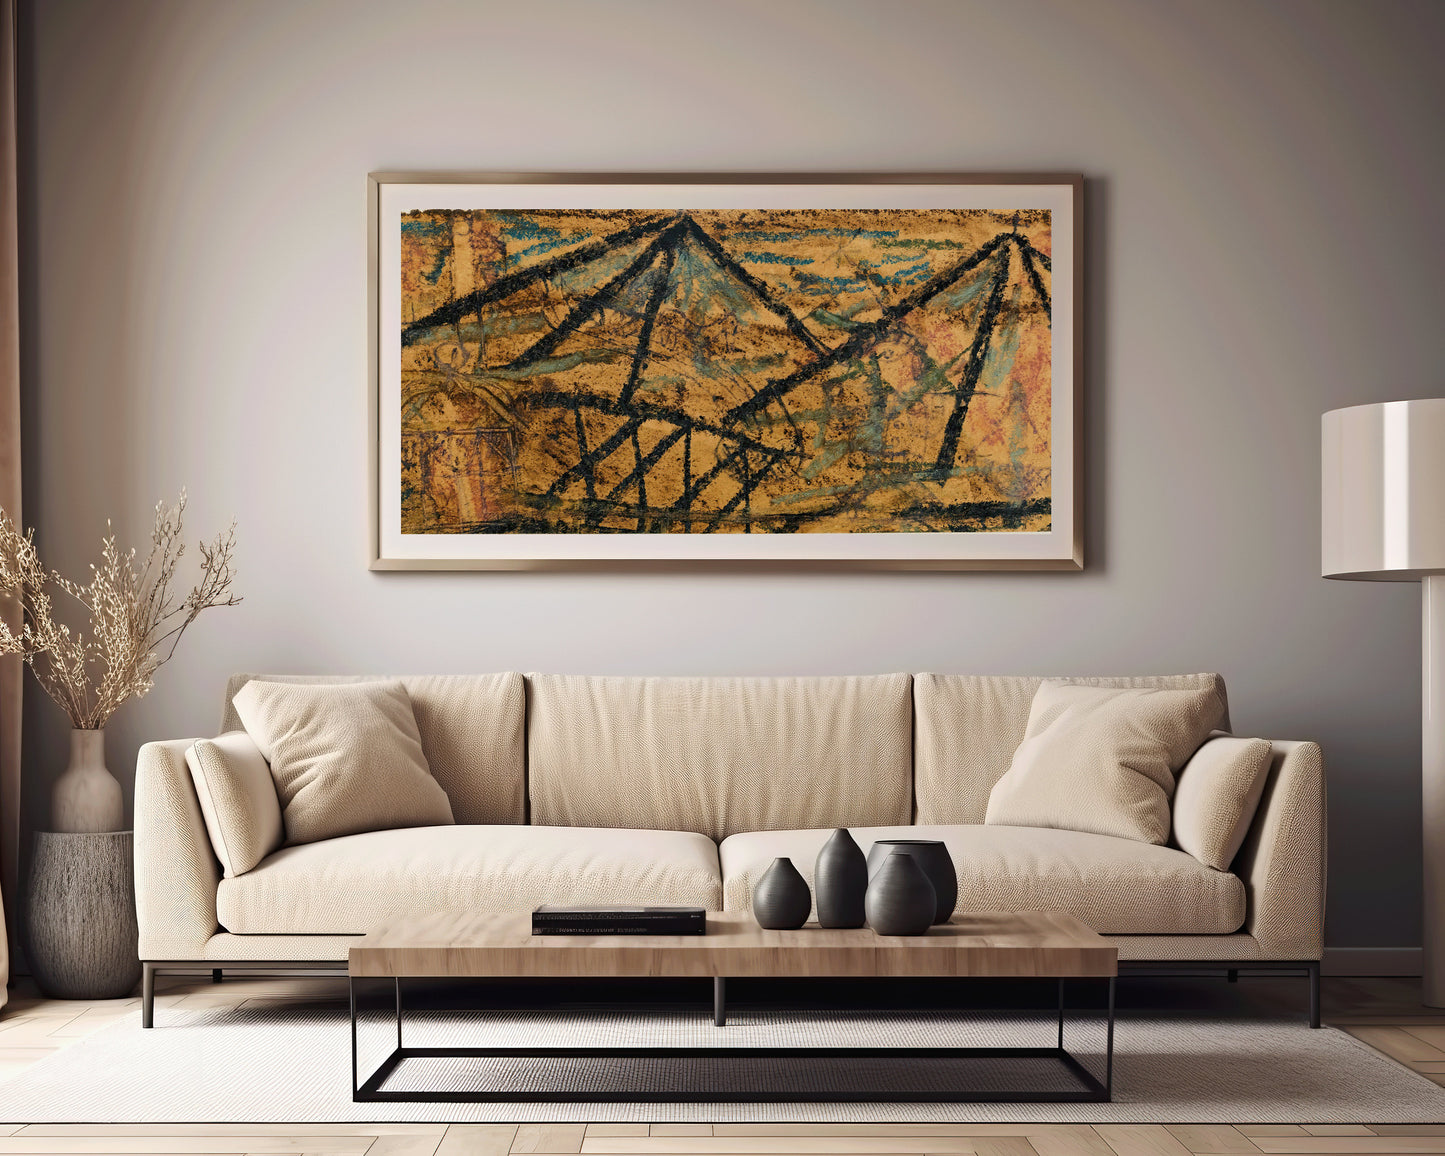 Paul Klee - With the Water Carrier | Modern Abstract Wide Panoramic Art (available framed or unframed)